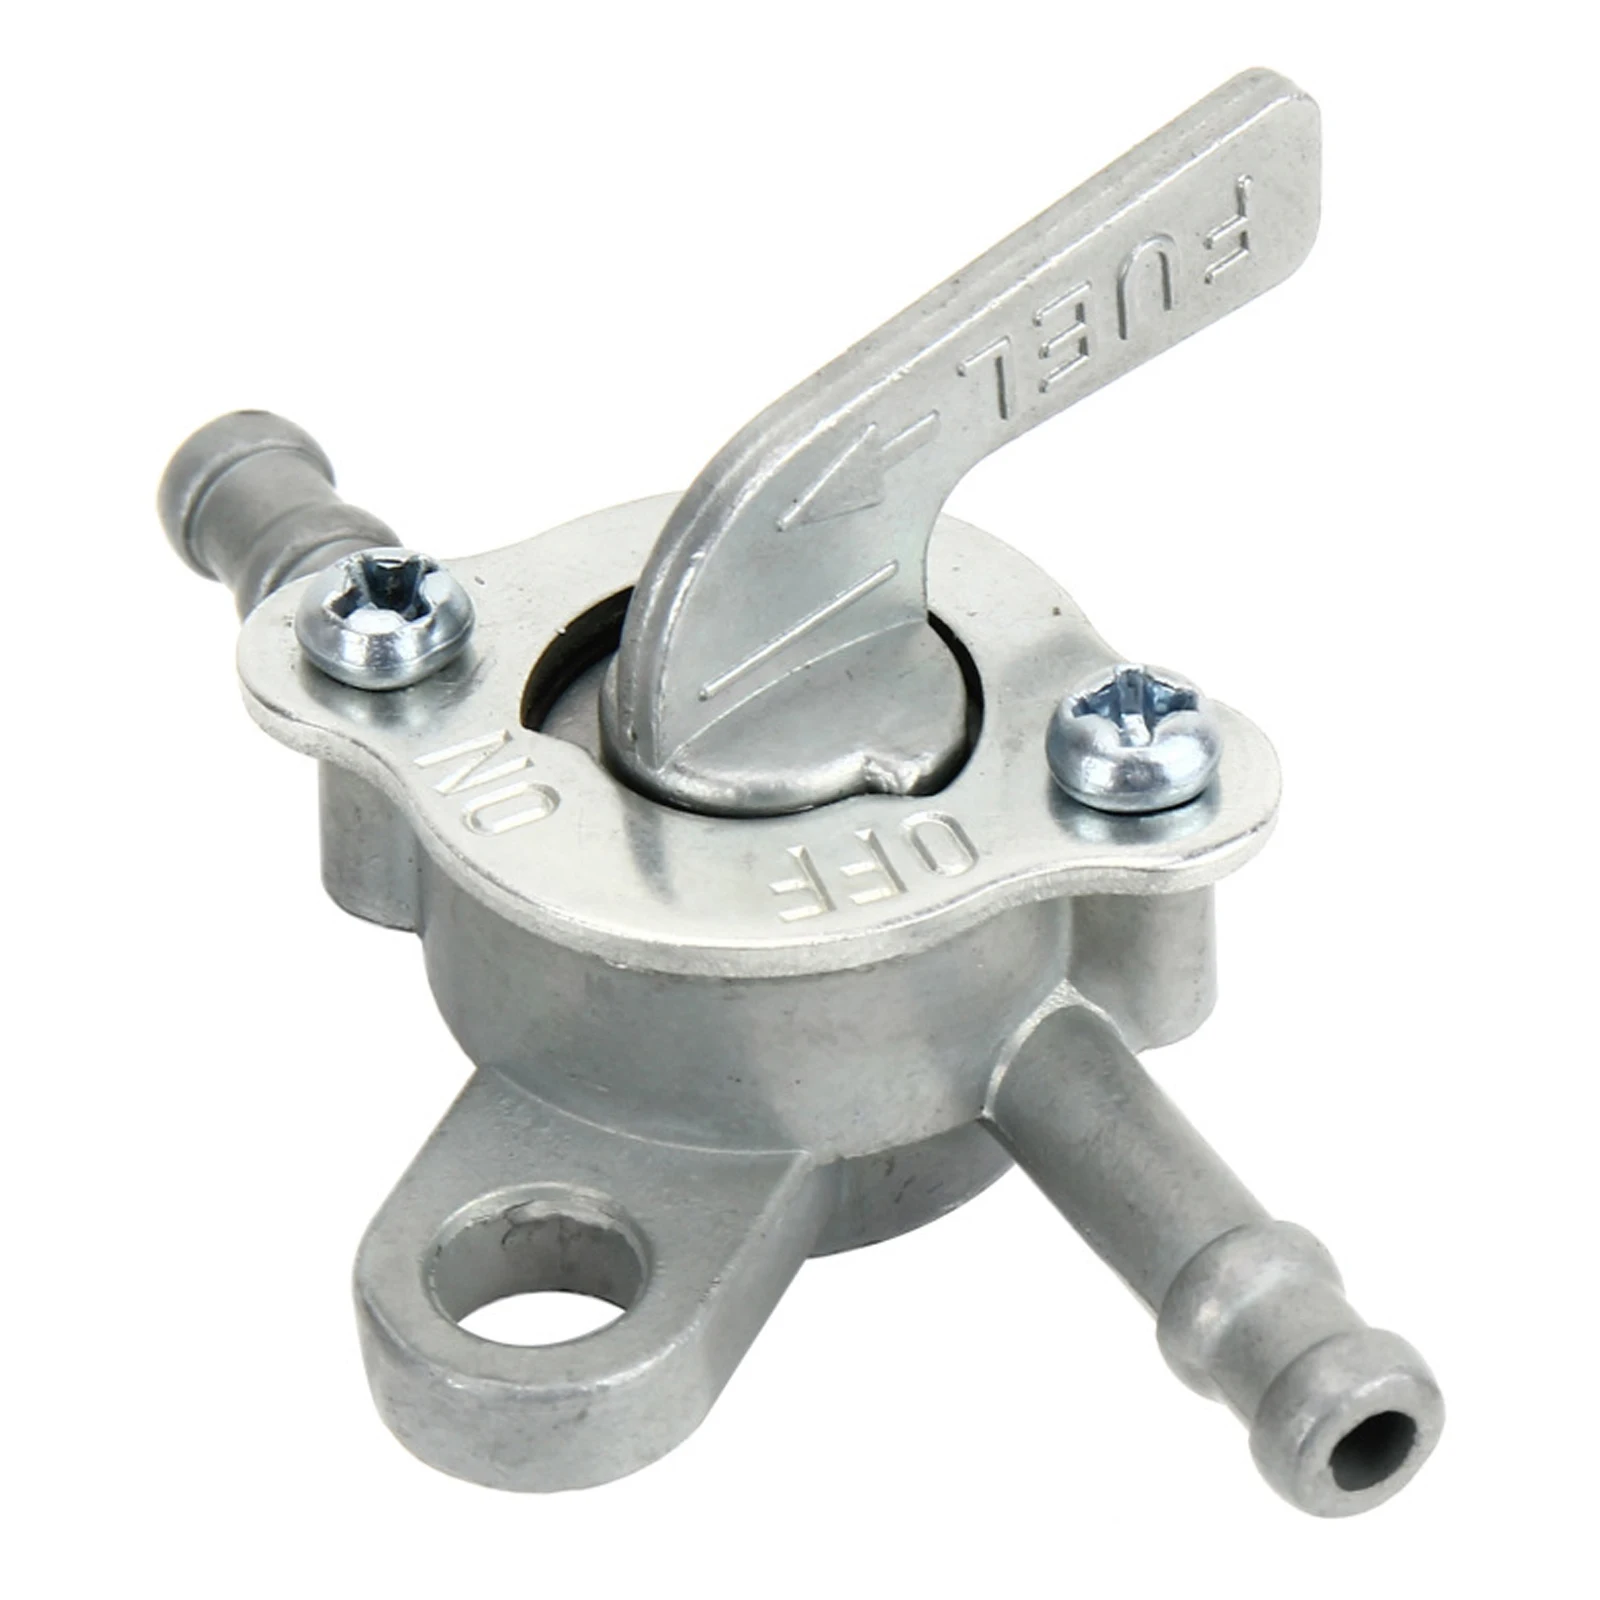 Fuel Petrol Tank Switch Tap Petcock Gasoline Valve With Two Ends On/Off Switch For Cross-country Motorcycle ATV Moped